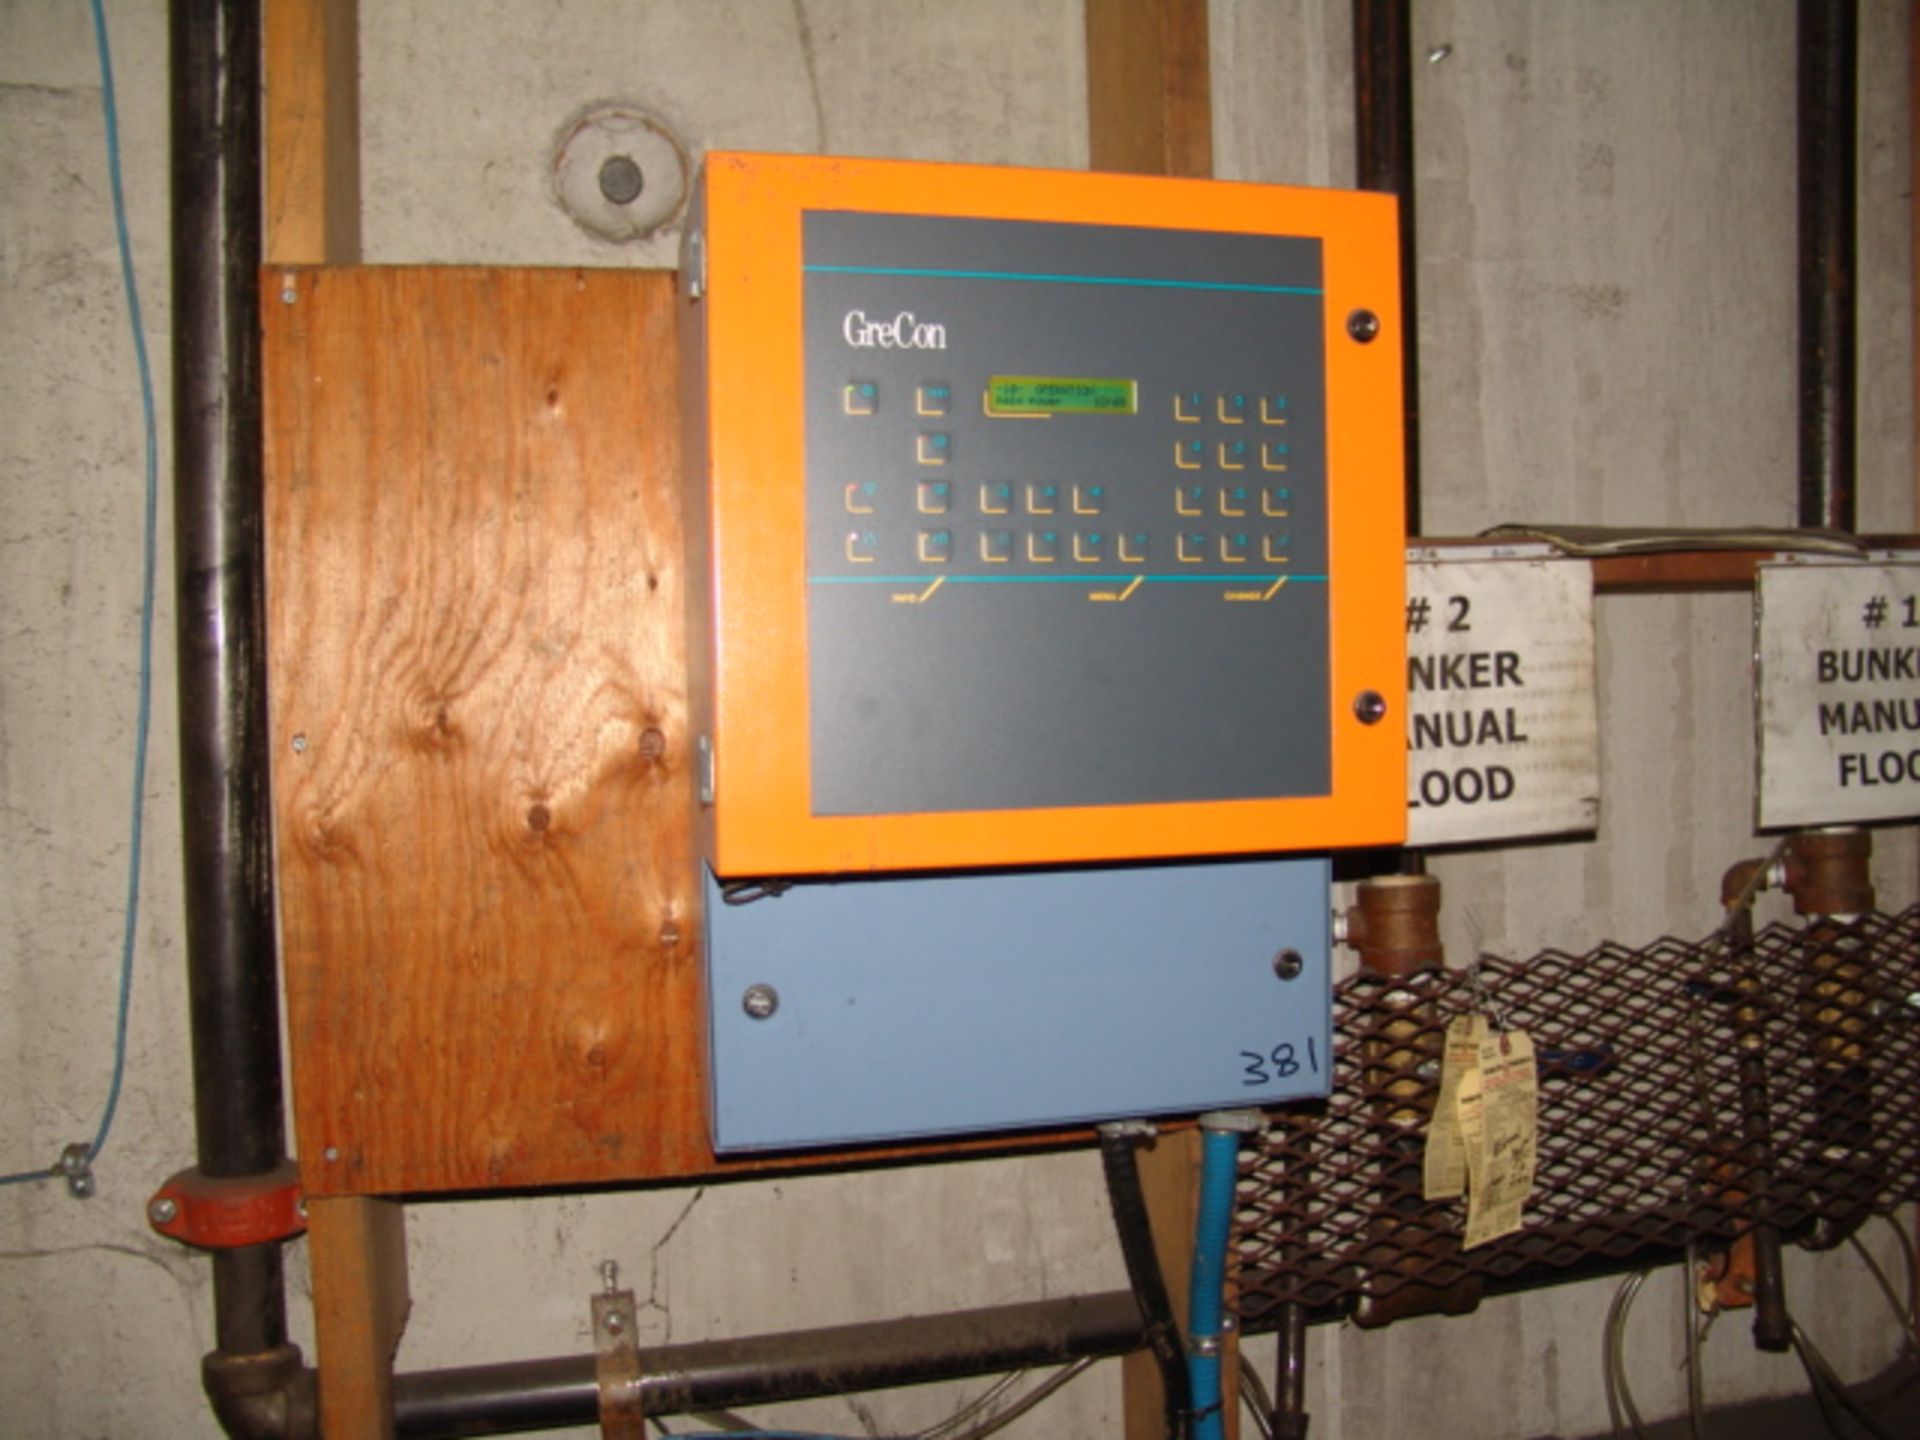 GRECON DUST COLLECTOR SPARK DETECTION DIGITAL CONTROL PANEL